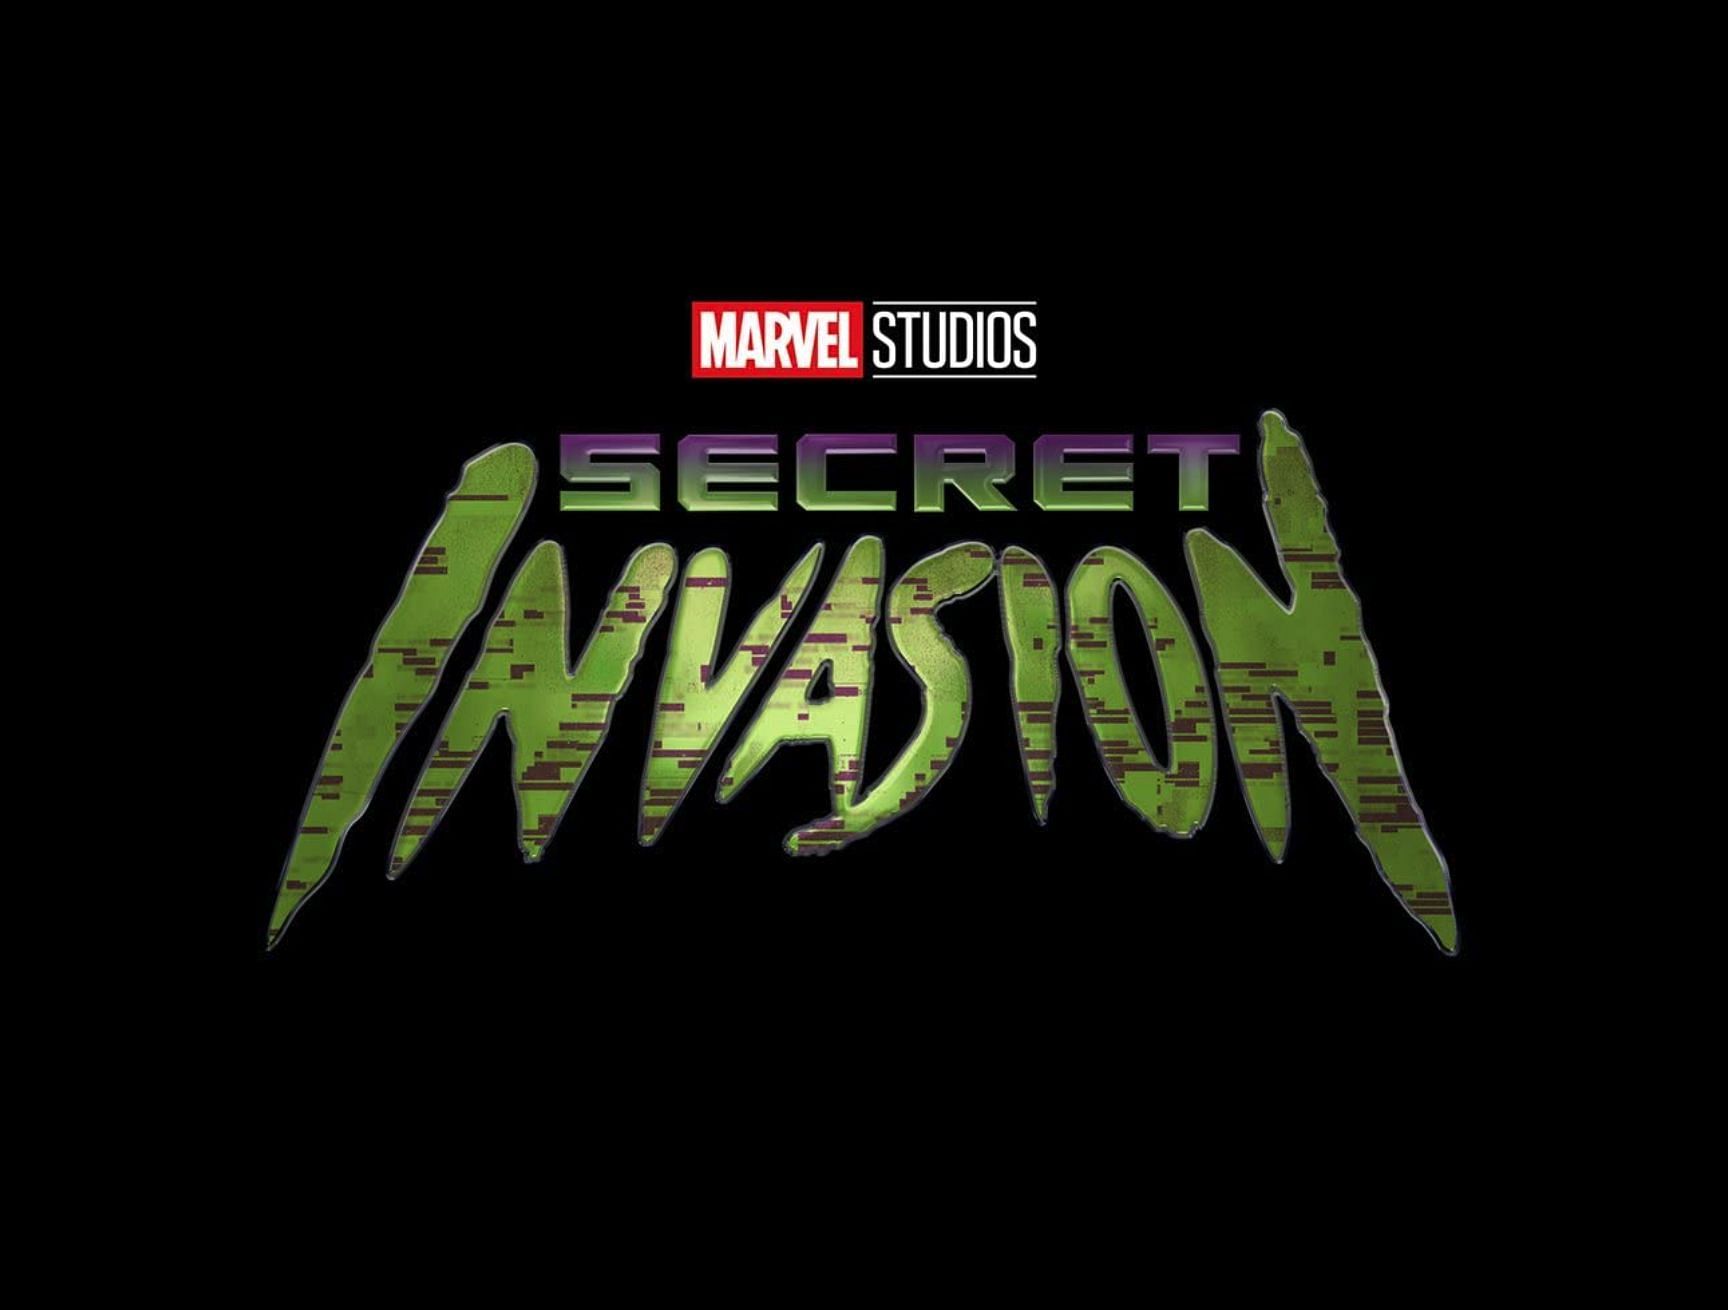 Who plays the president of the United States in Secret Invasion?